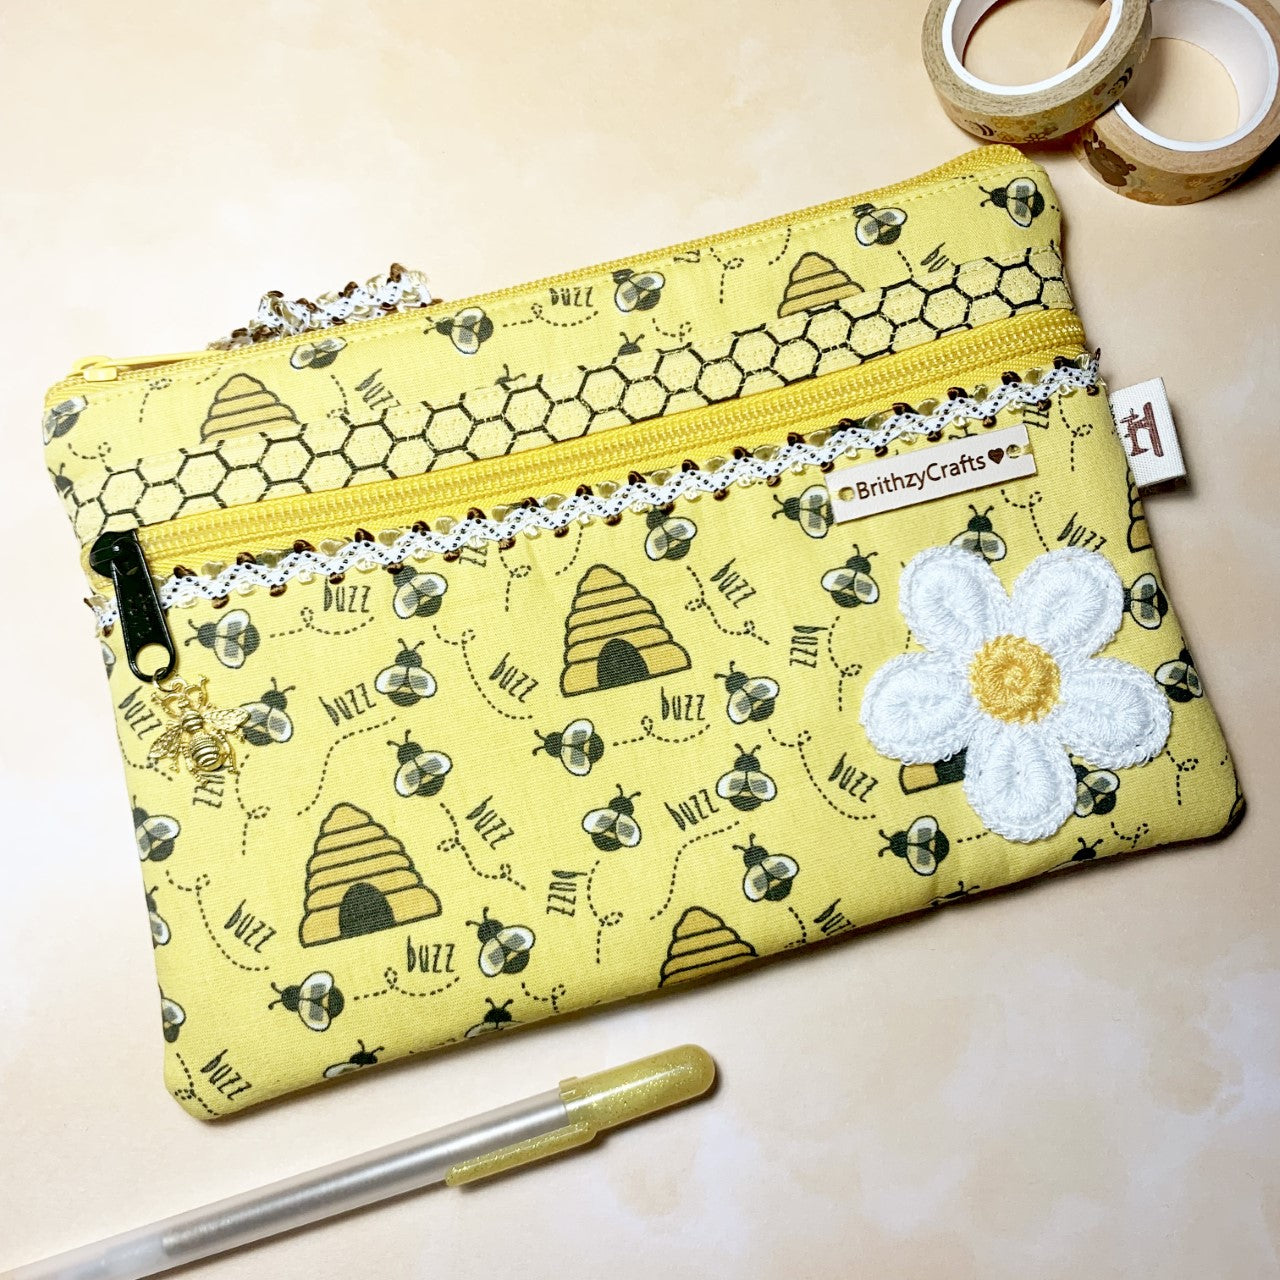 Buzz bees - double pocket Pouch